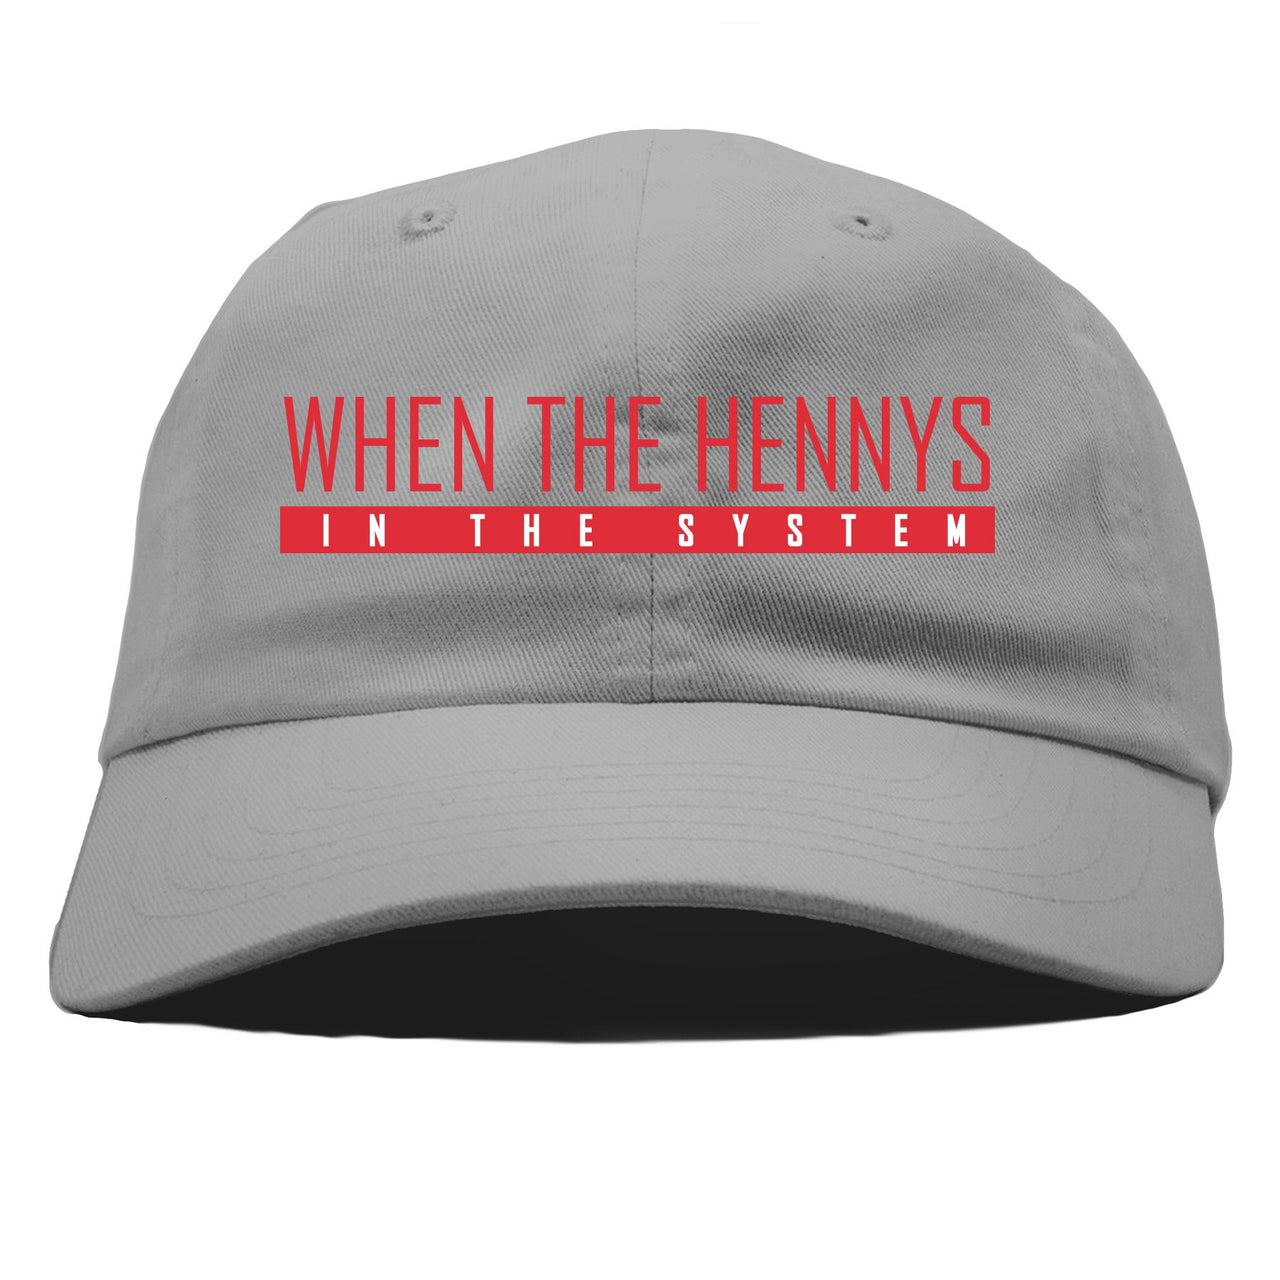 Bred 2019 4s Dad Hat | When the Hennys, Gray